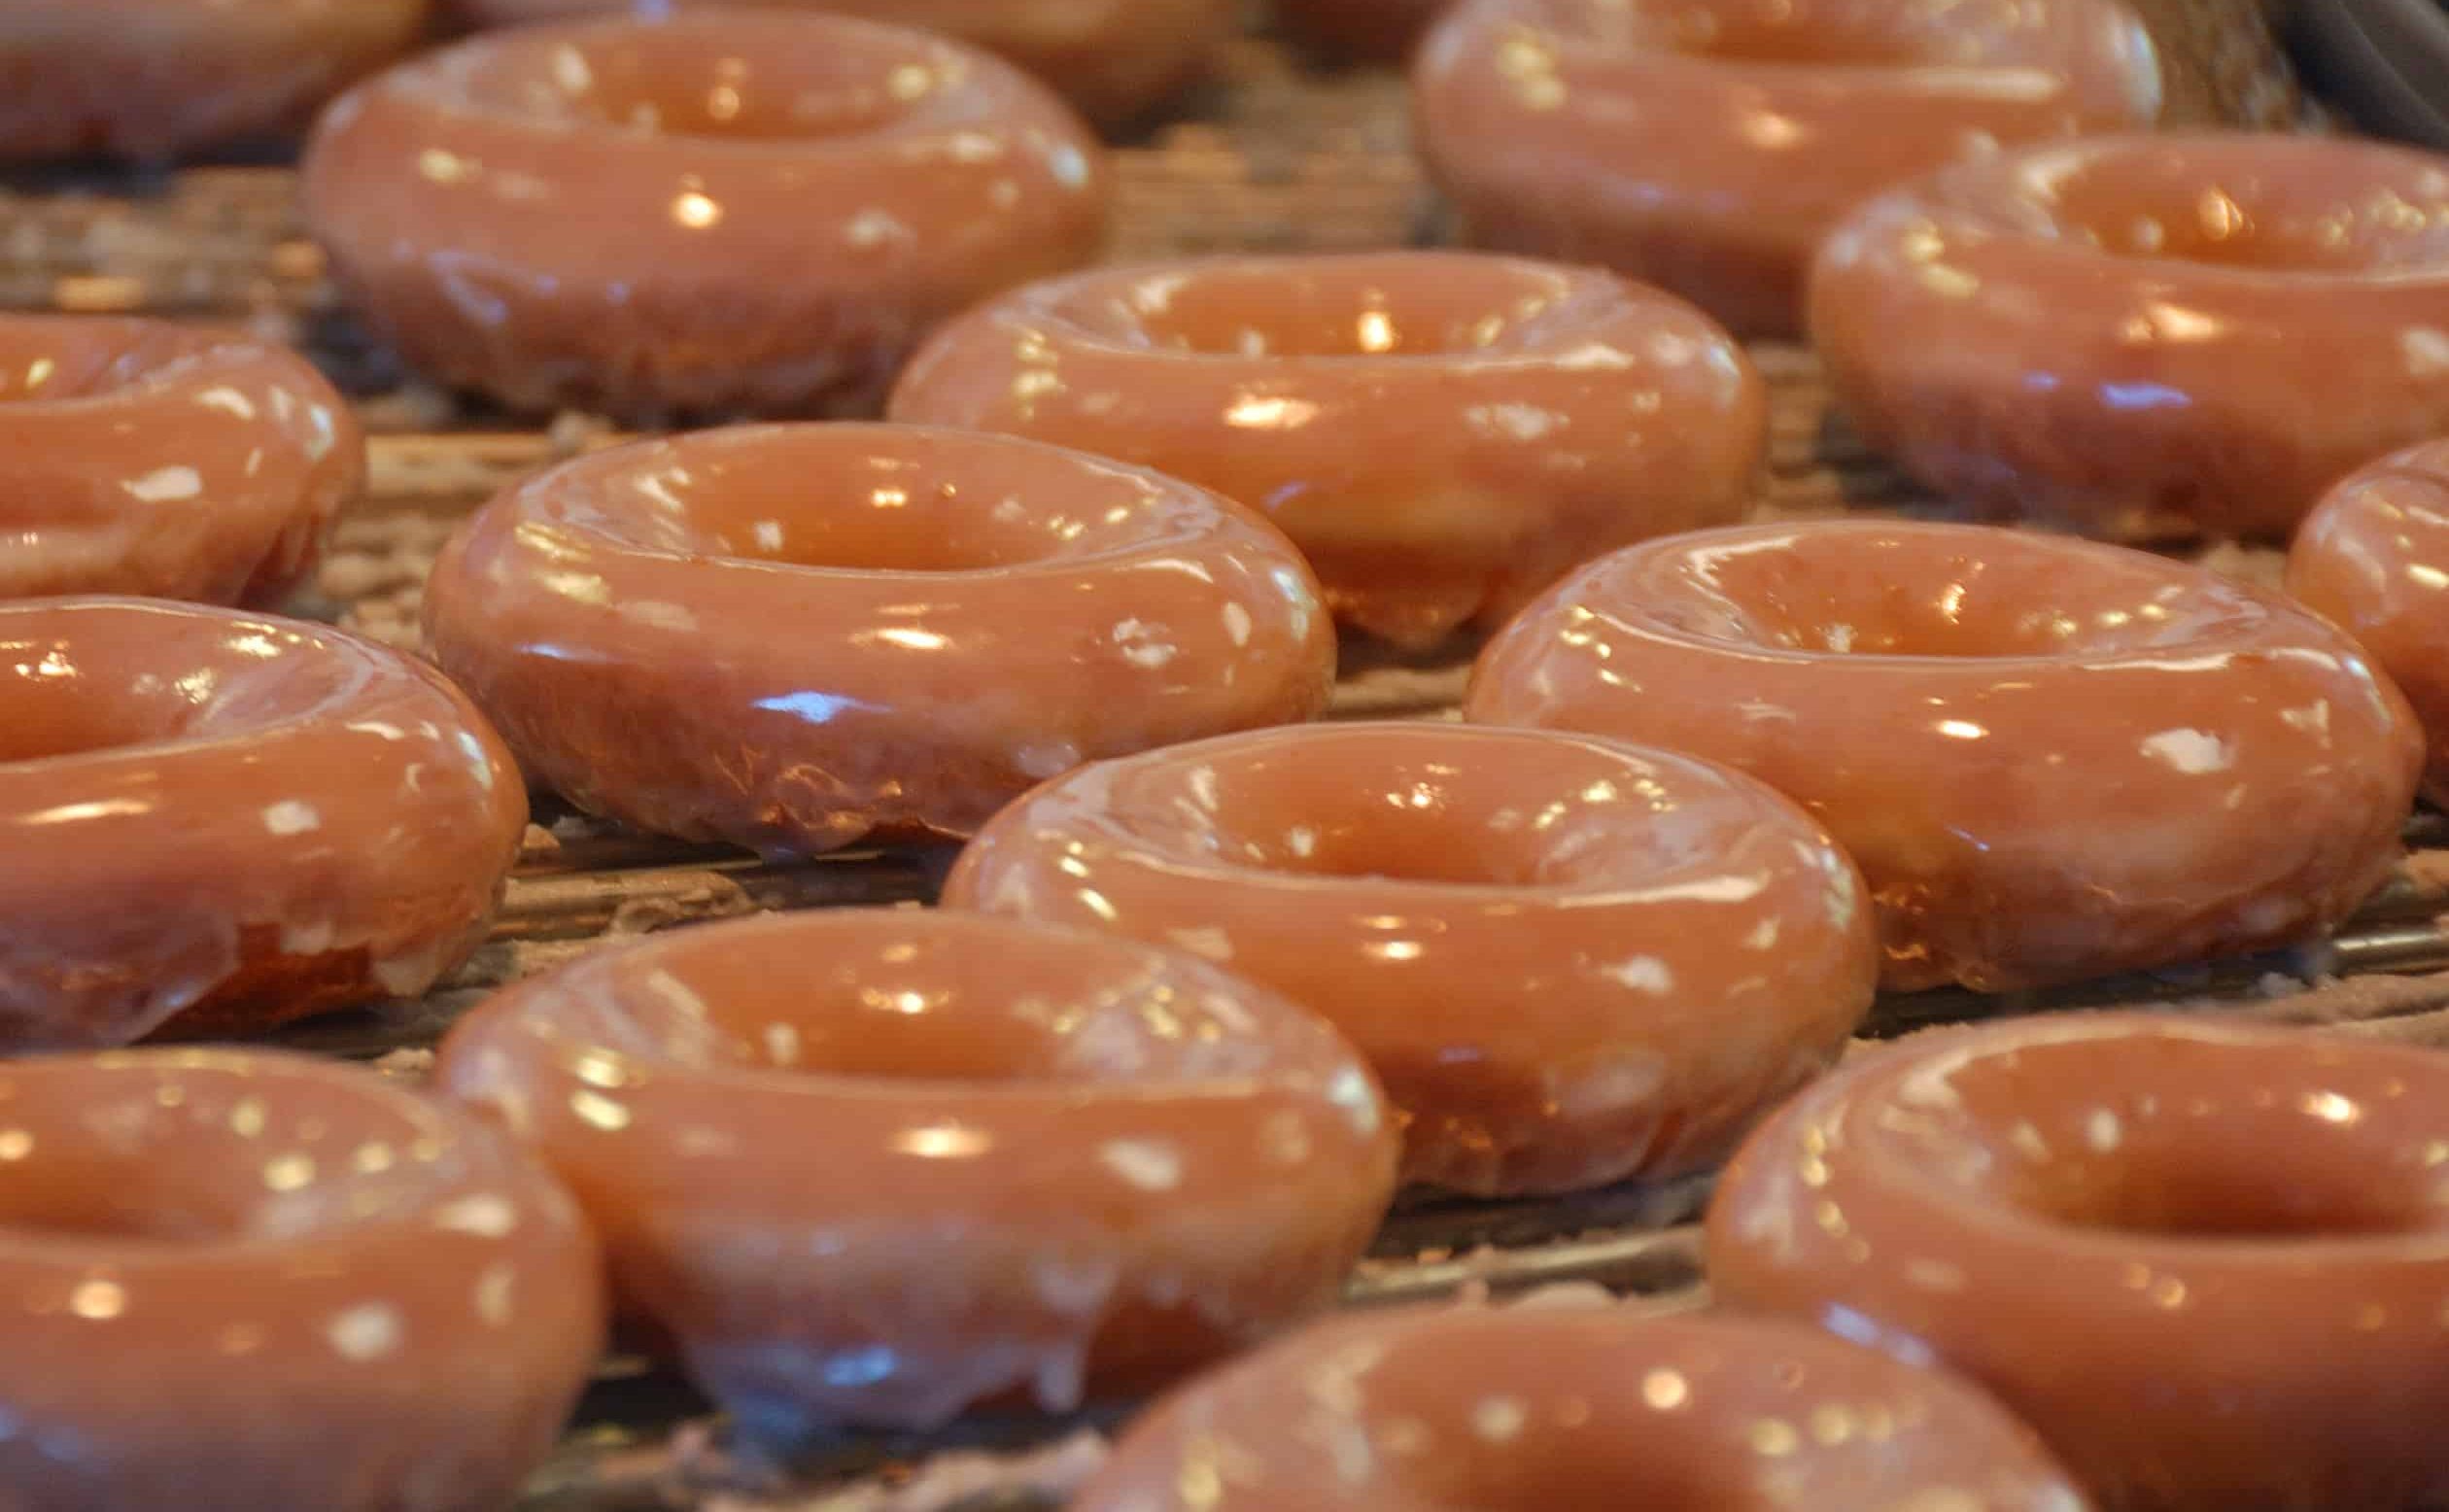 Krispy Kreme in Mississauga makes more doughnuts than any other doughnut shop in the world and a new store is opening in Hamilton